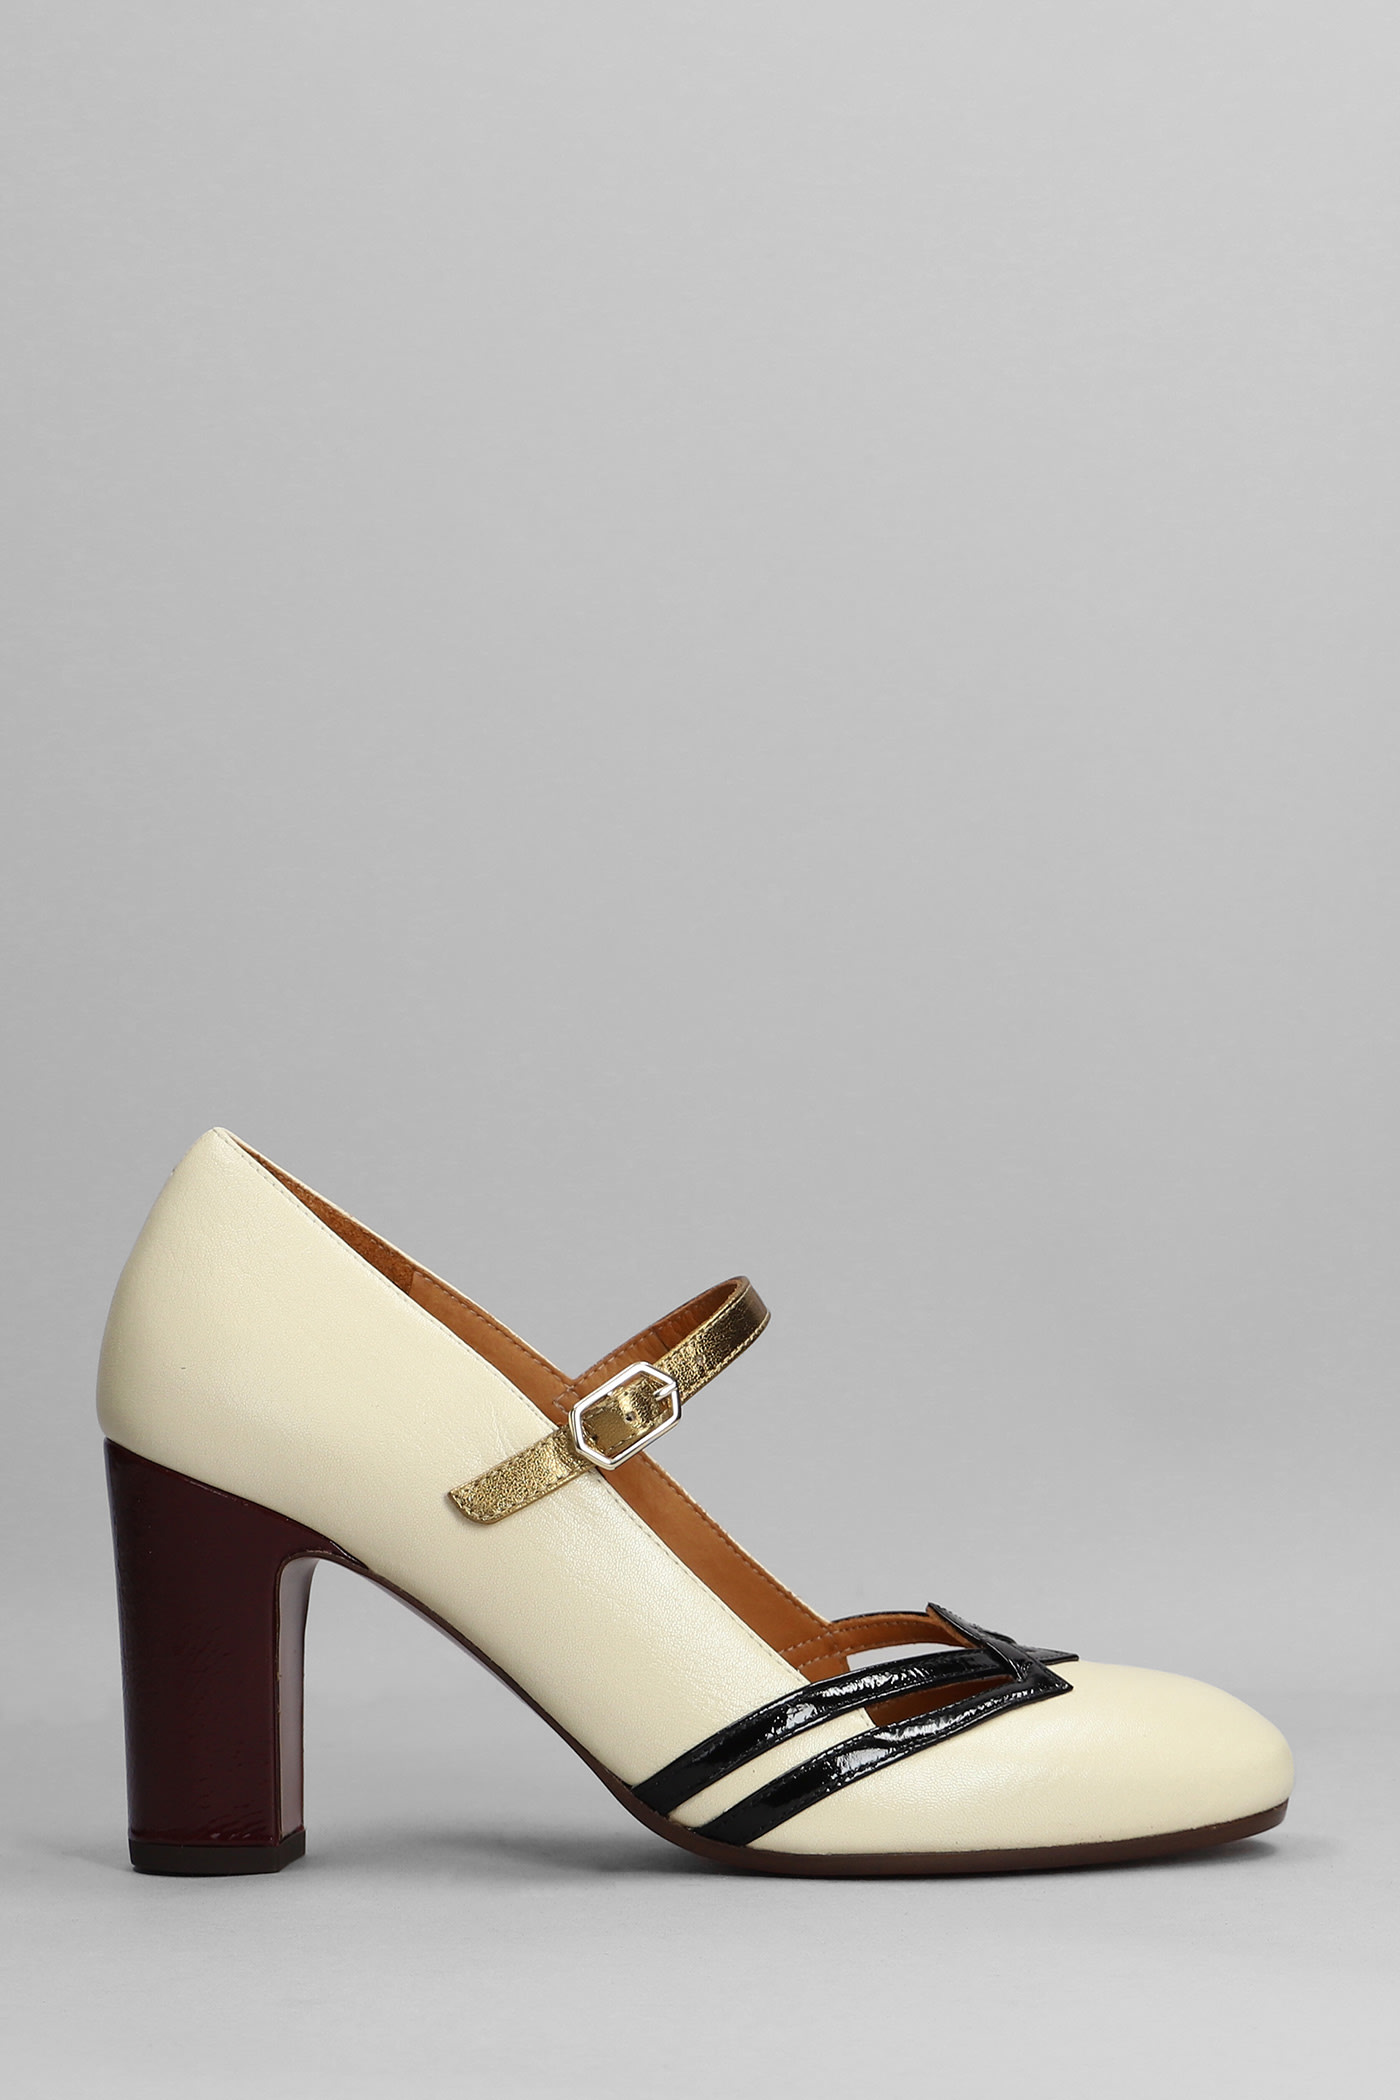 Chie Mihara Wego Pumps In Beige Leather